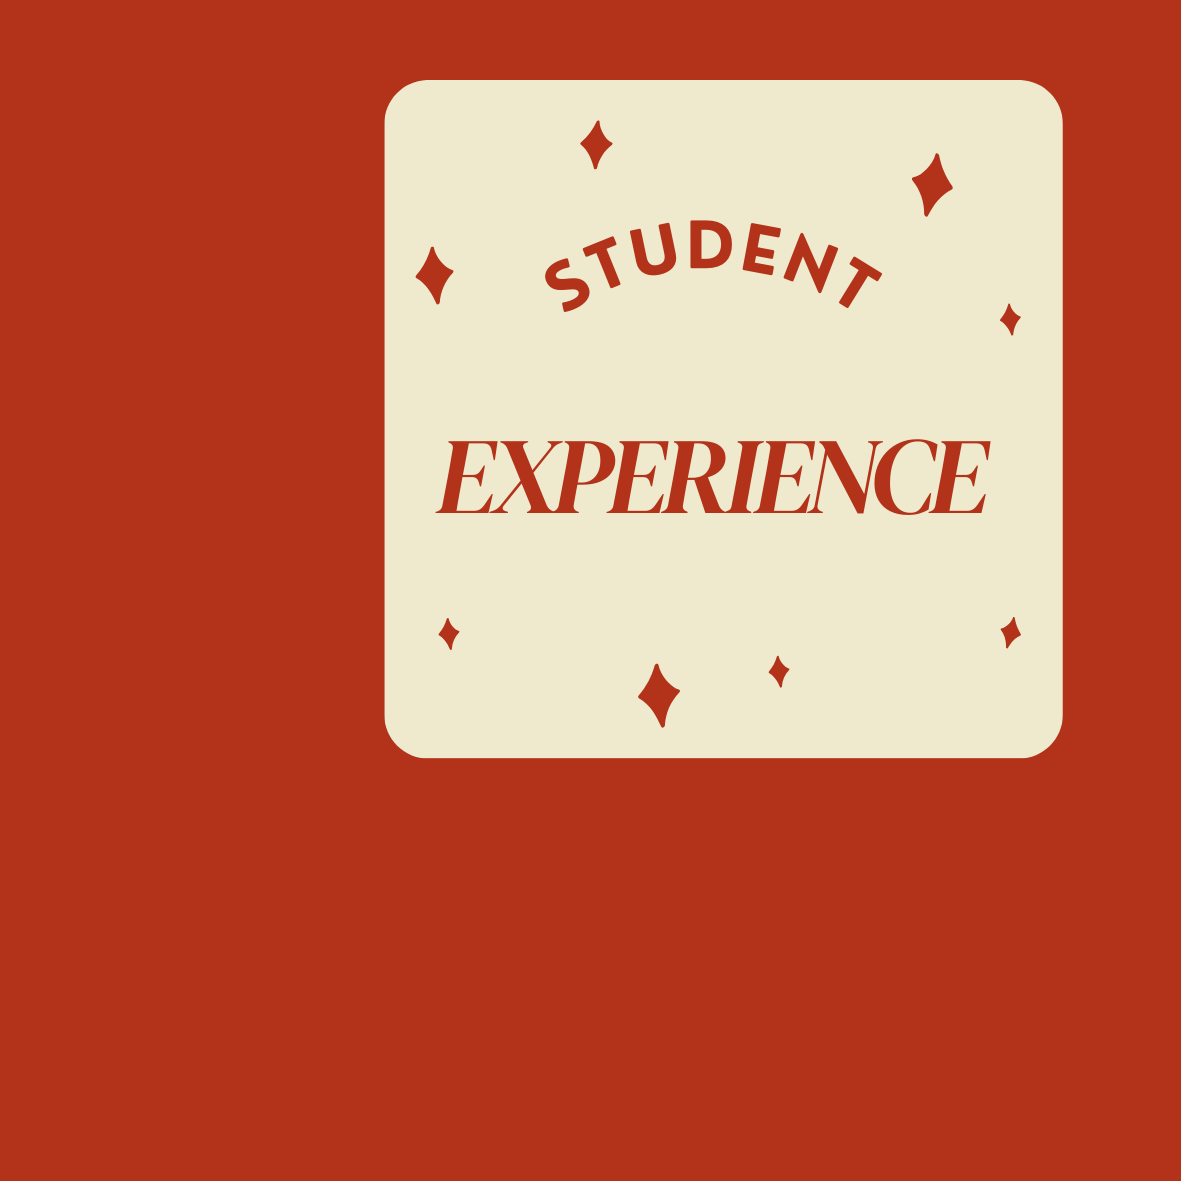 STUDENT EXPERIENCE